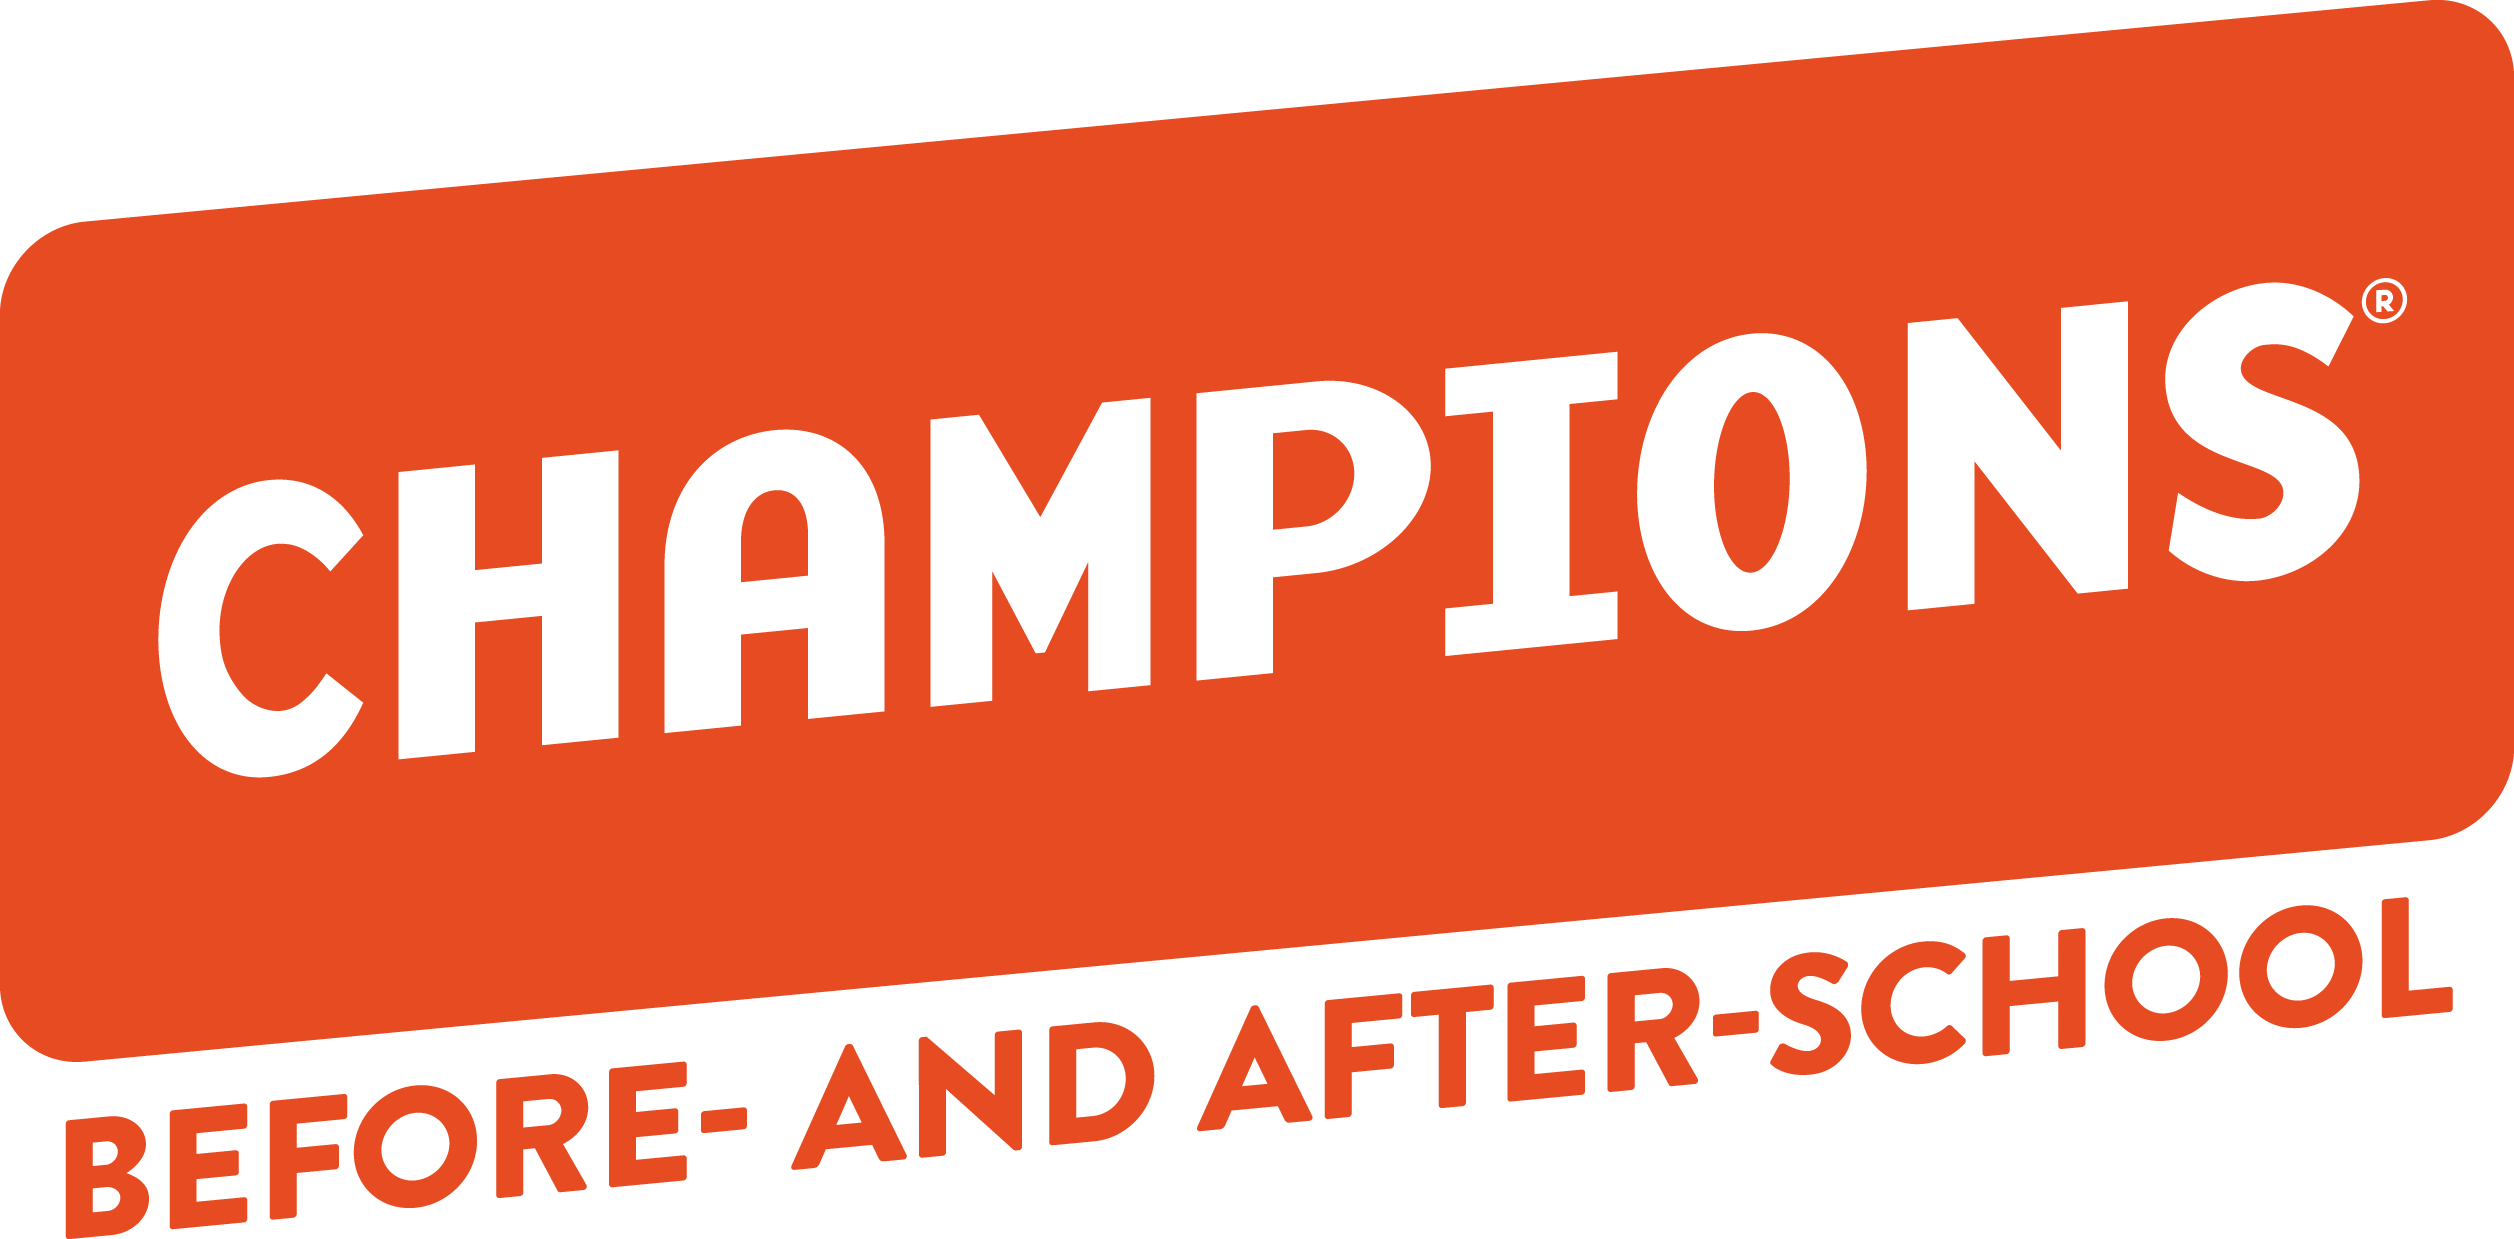 Champions Before- and After- School